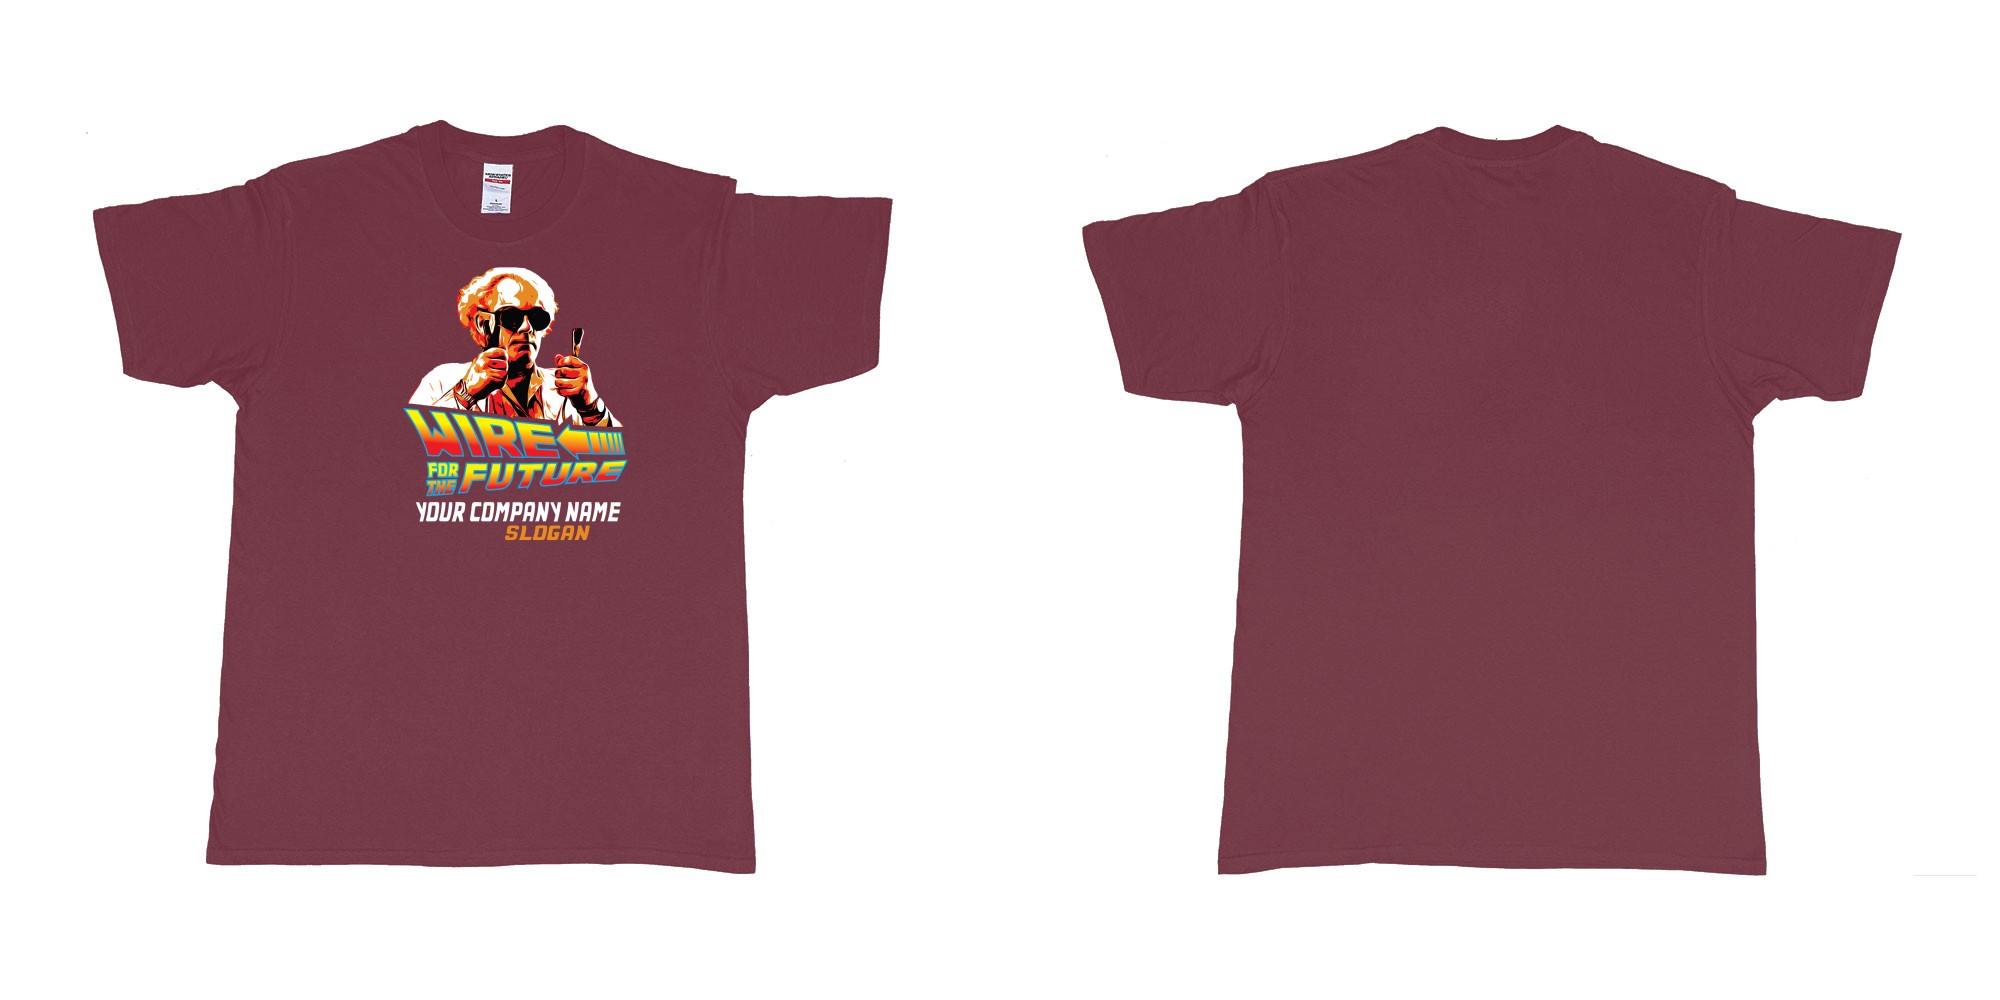 Custom tshirt design wire for the future back to the future electrician sparky in fabric color marron choice your own text made in Bali by The Pirate Way